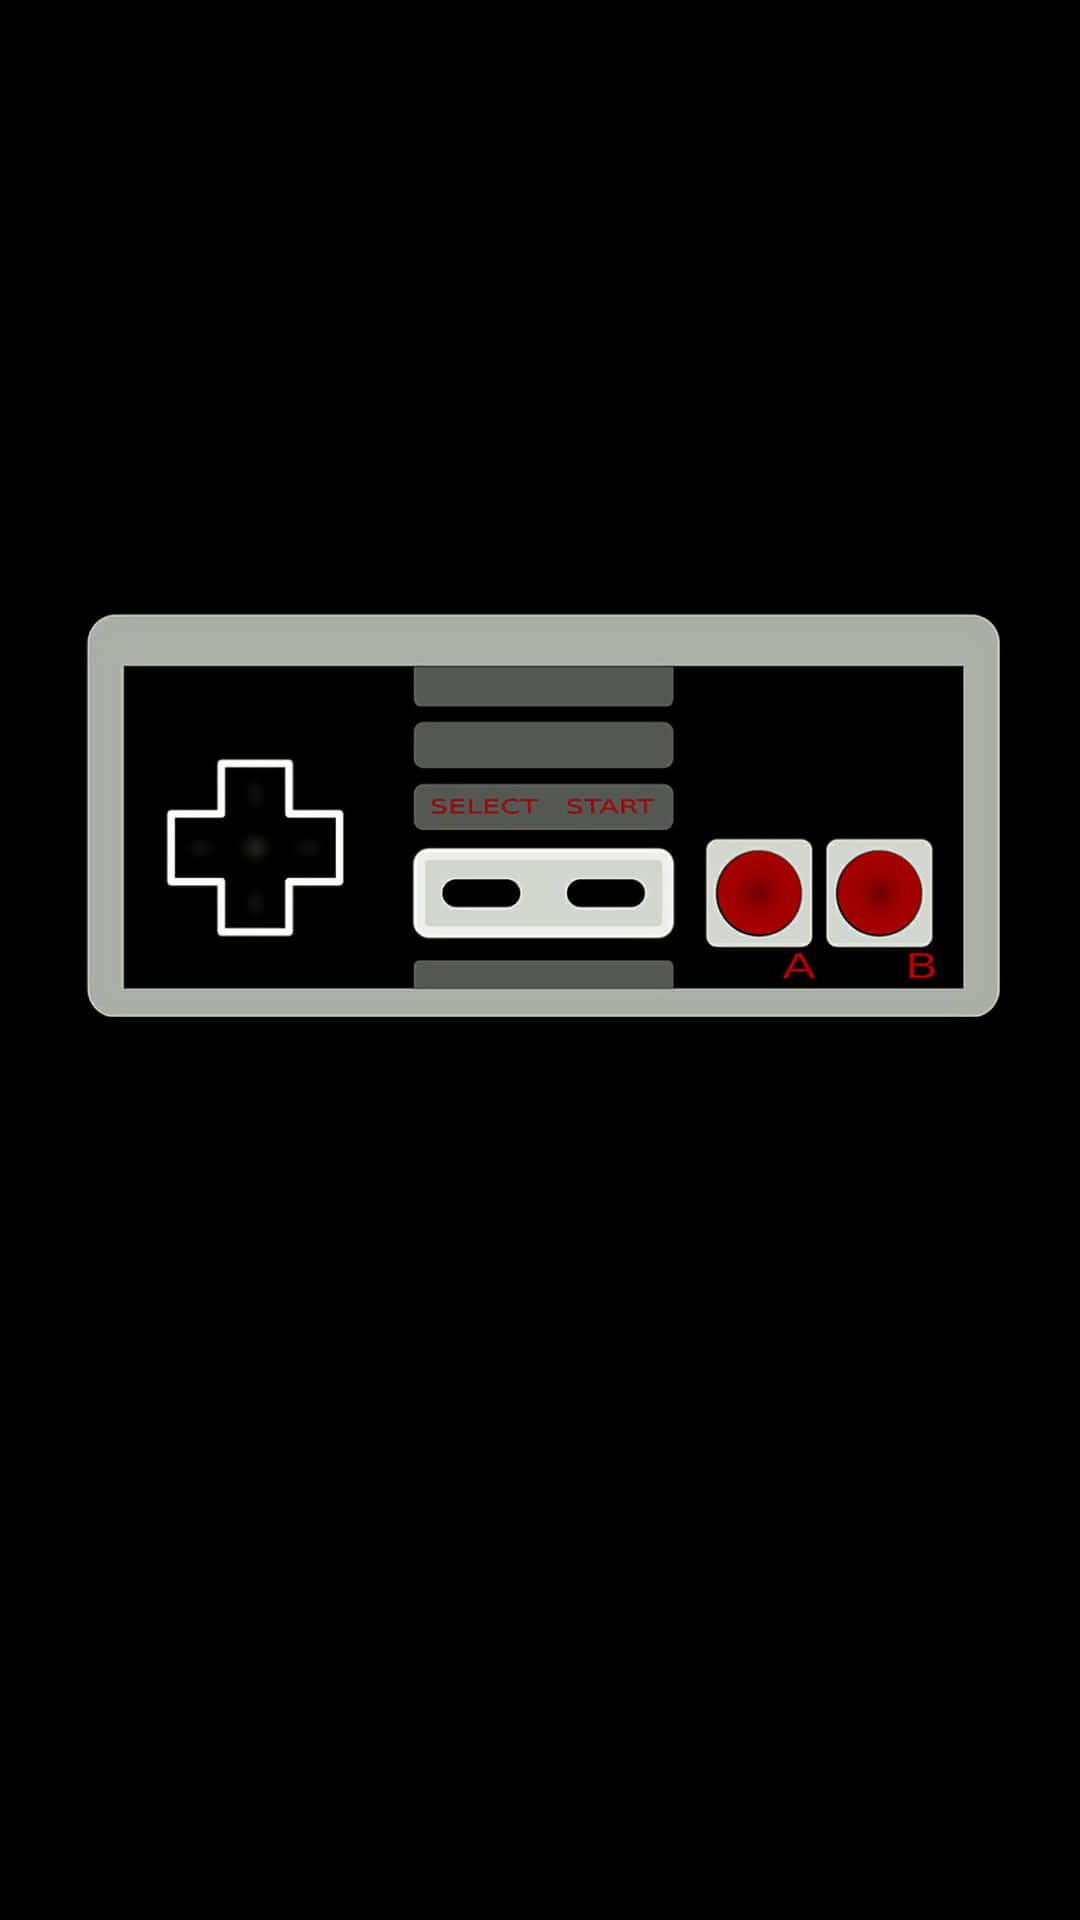 A Nintendo Game Controller On A Black Background